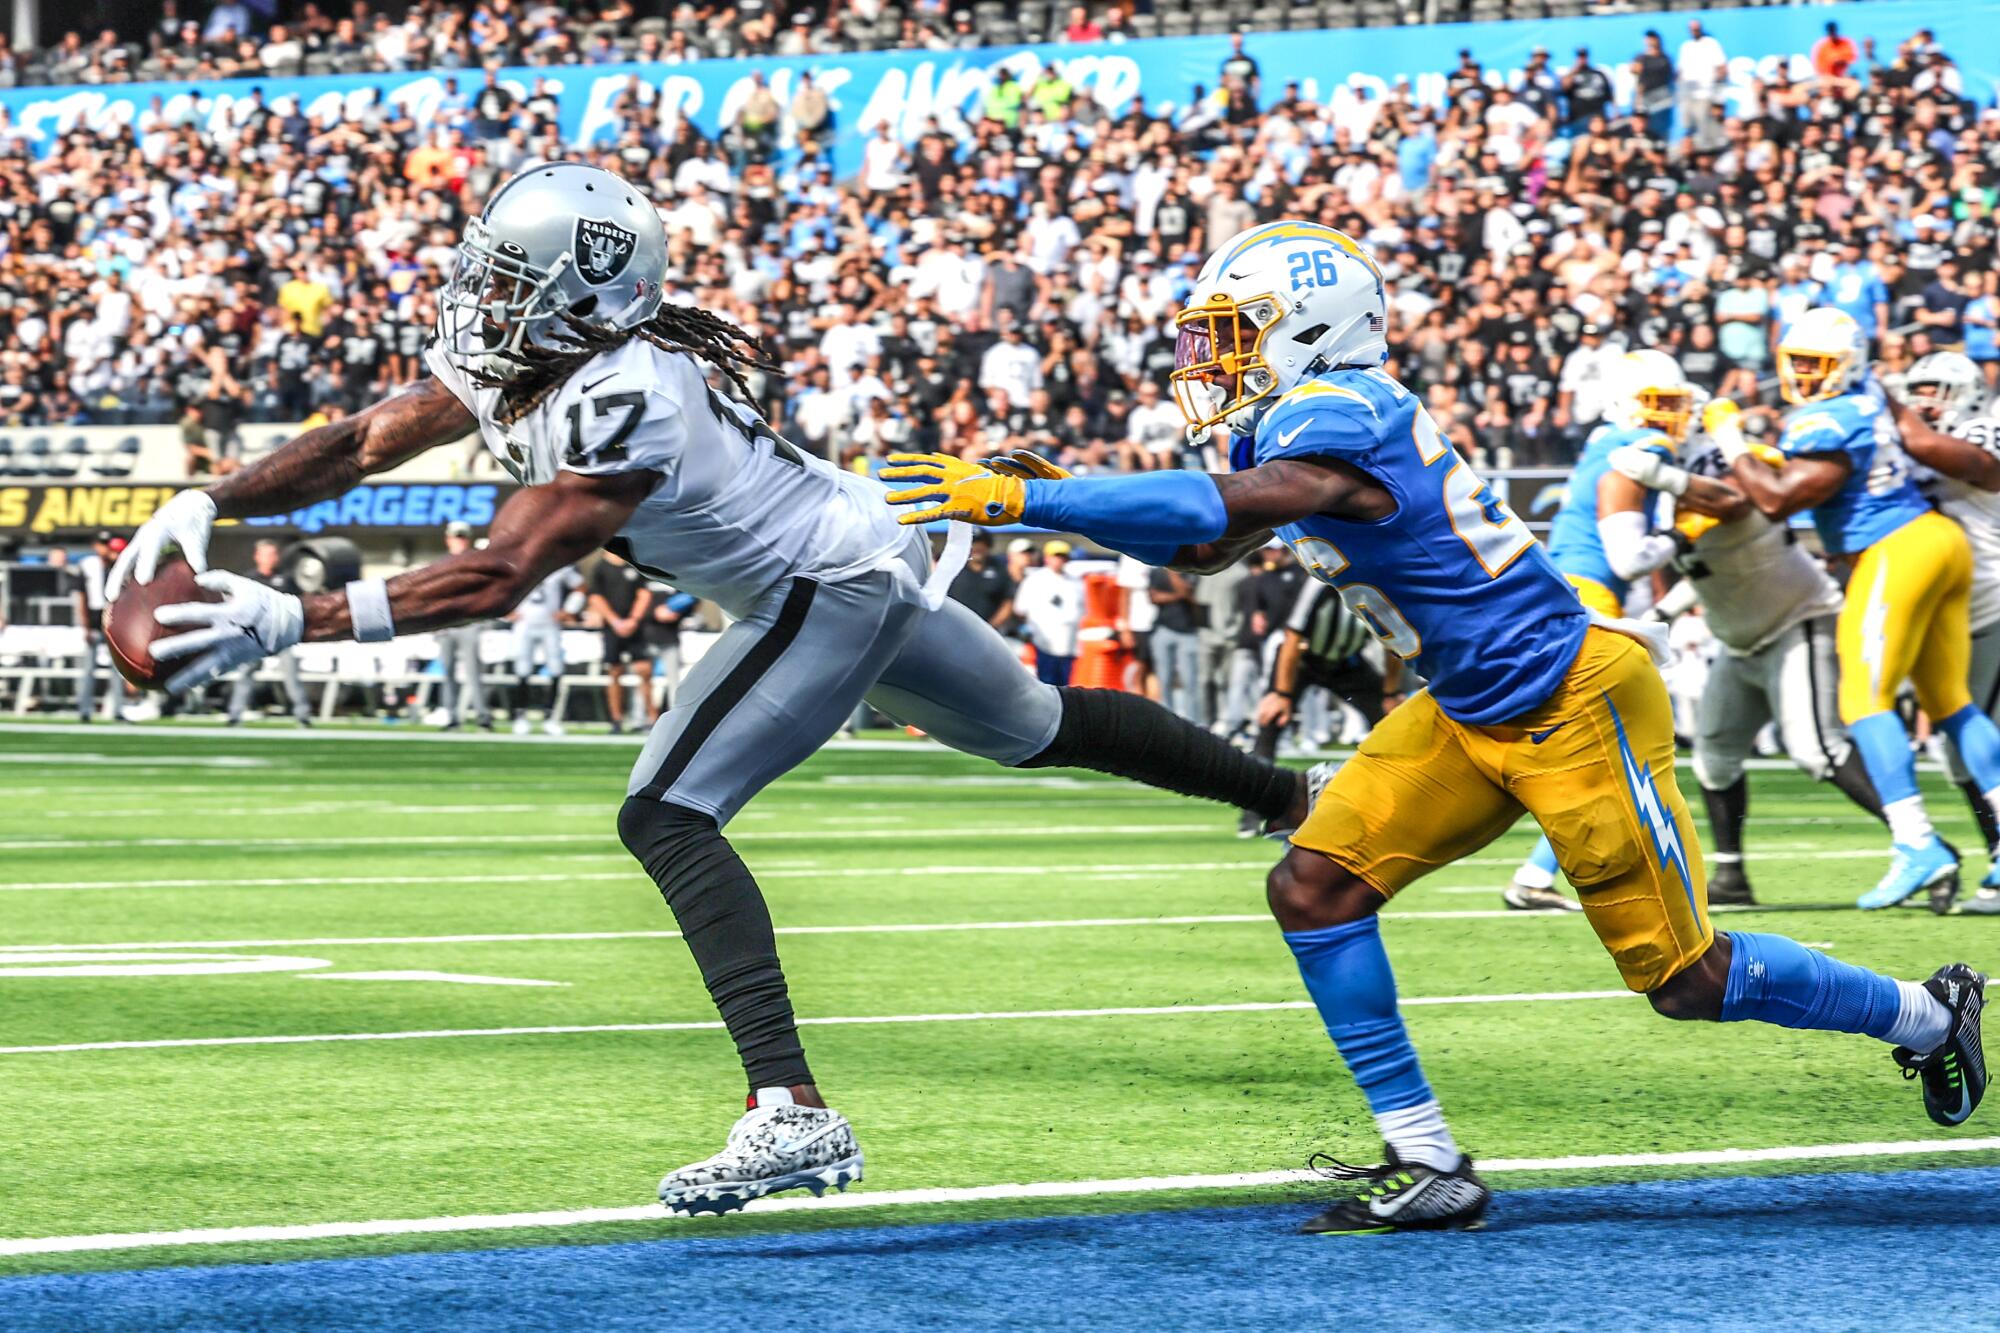 Raiders wide receiver Davante Adams catches a touchdown pass in front of Chargers cornerback Asante Samuel Jr.